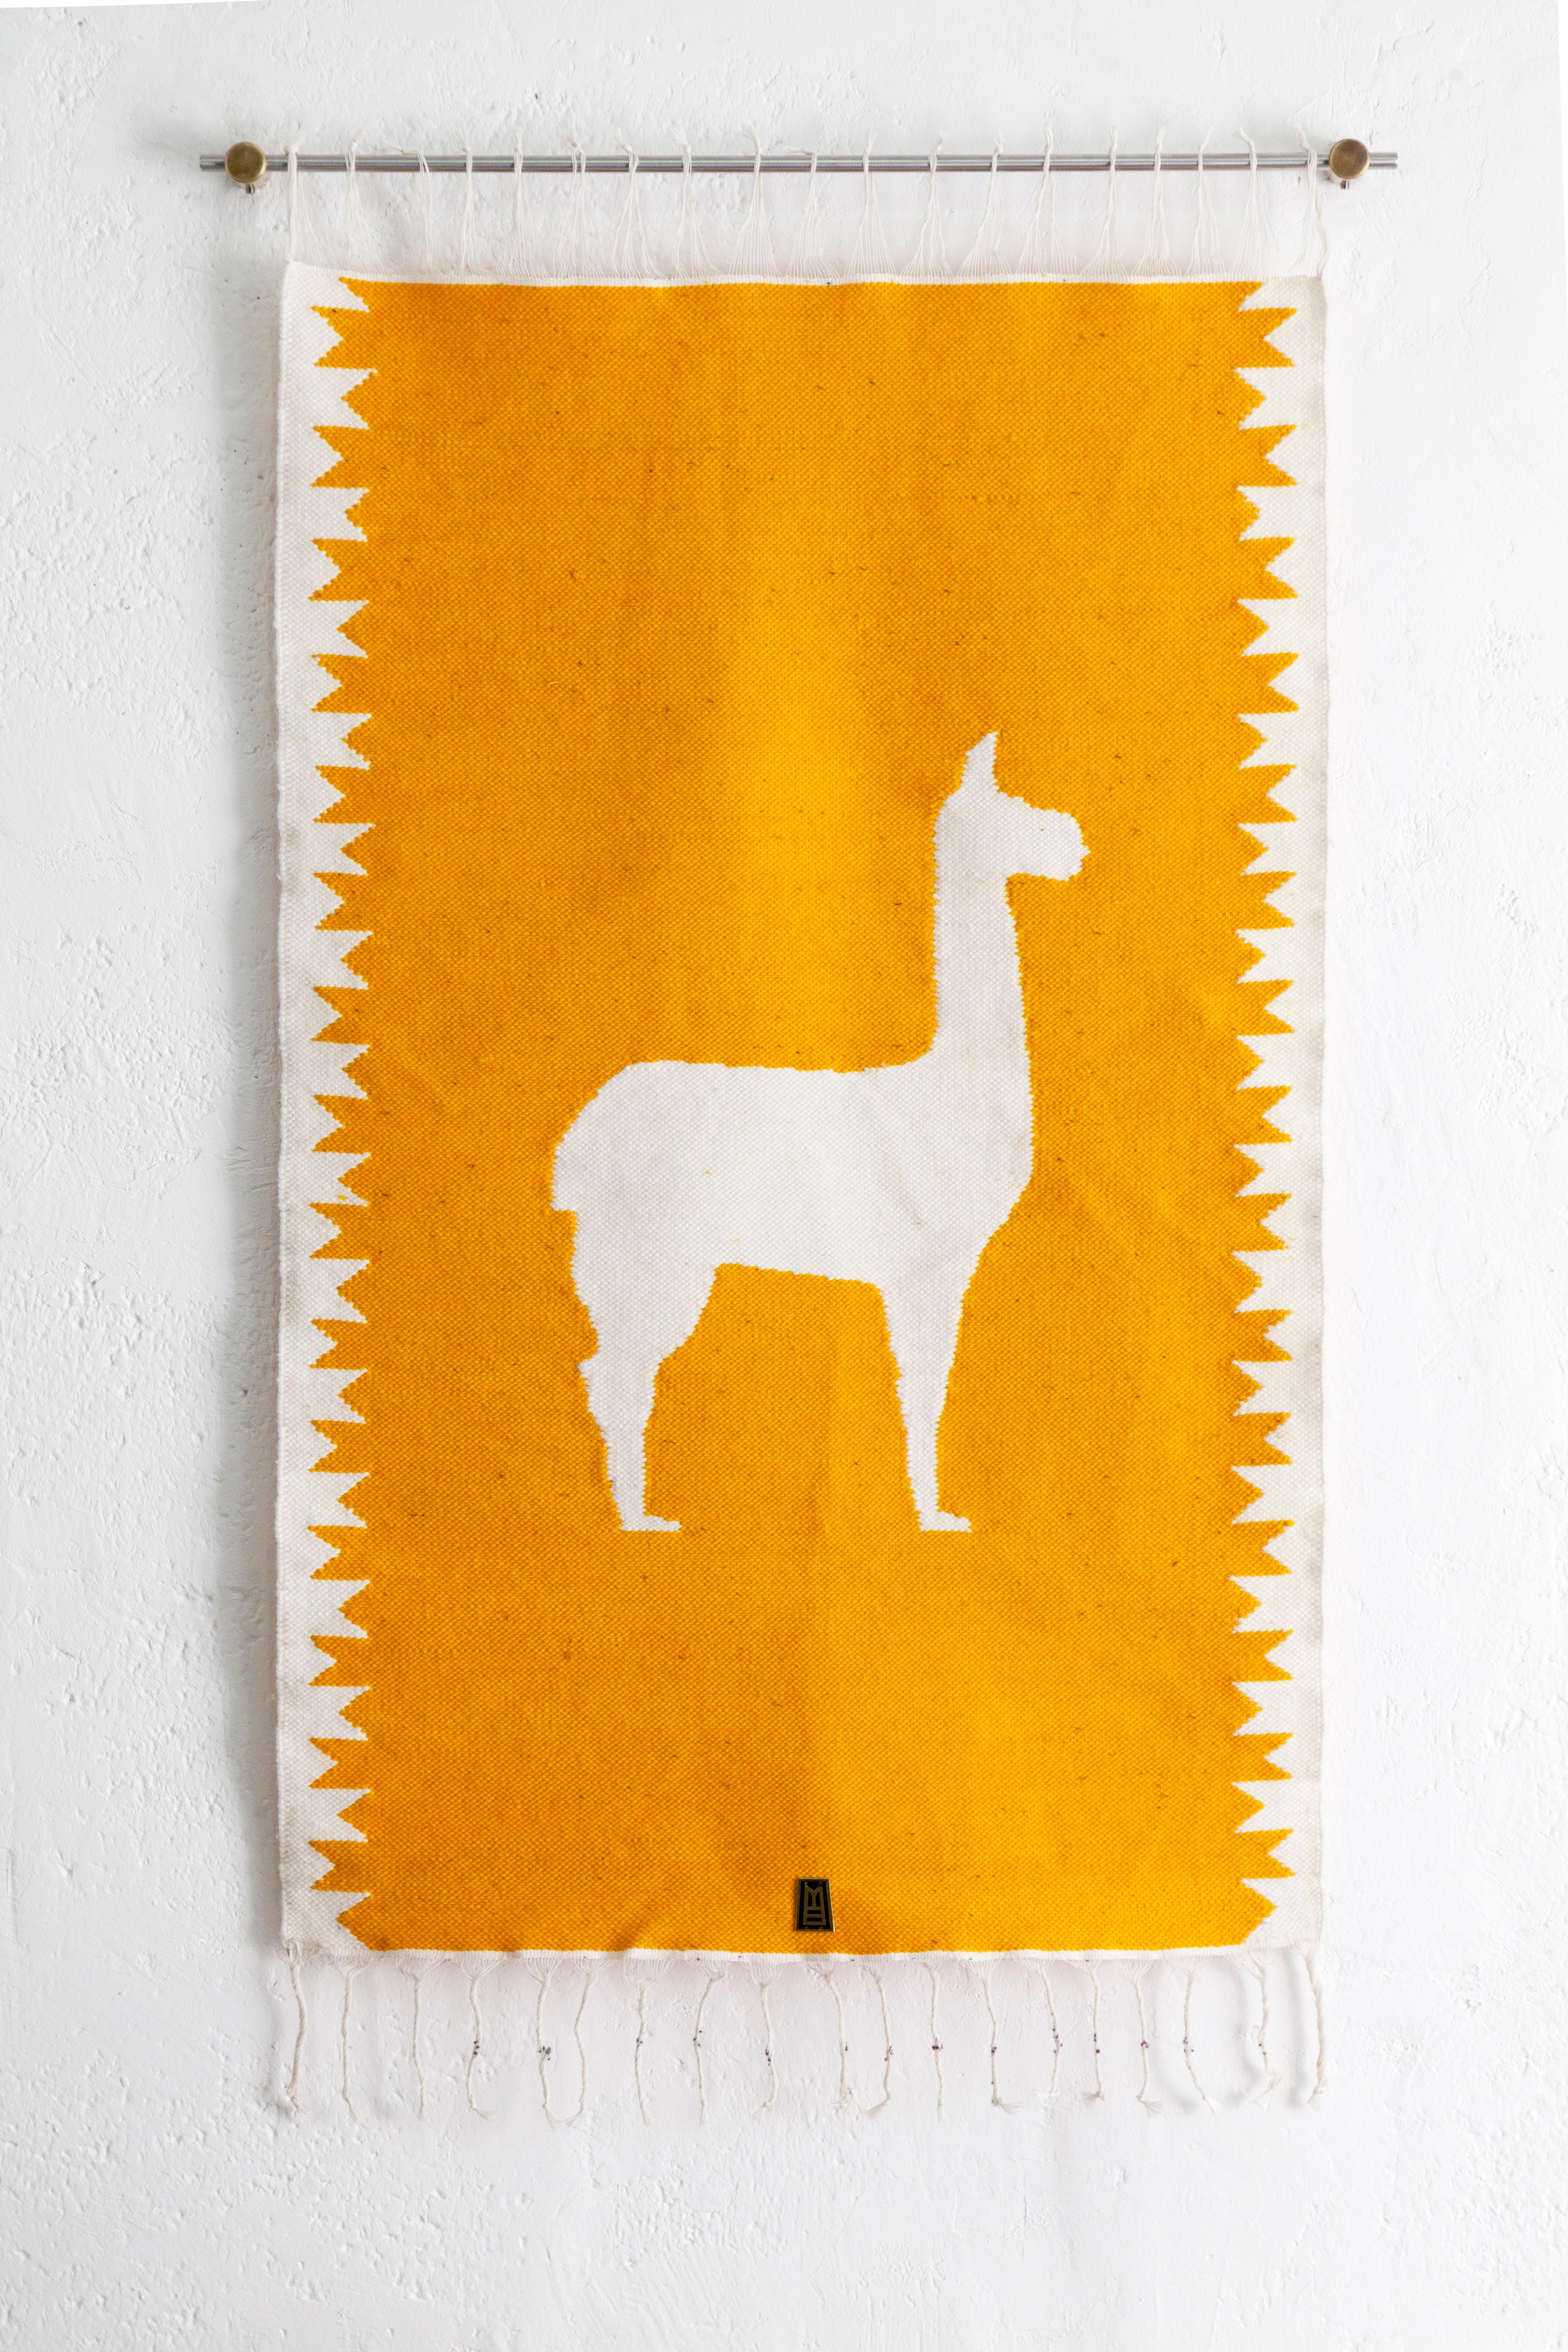 Handwoven sheep wool tapestry with wall-mounting lathed bronze bases, and stainless steel rod.

Capturing the essence of the Andes, these pieces are created using ancient weaving techniques yet loomed through an innovative approach to traditional